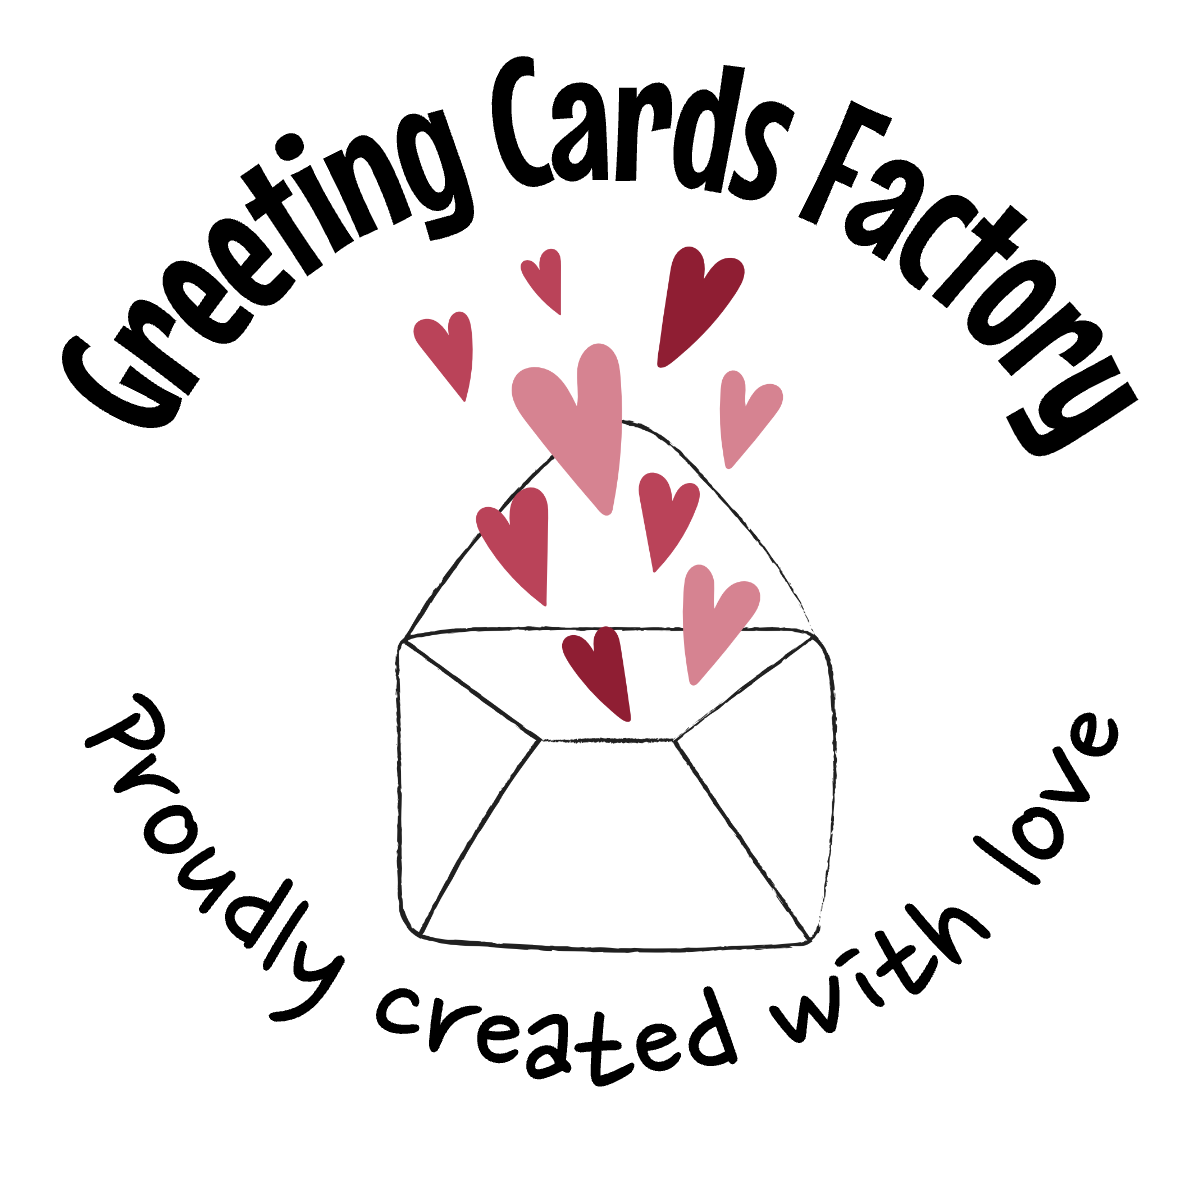 Greeting Cards Factory